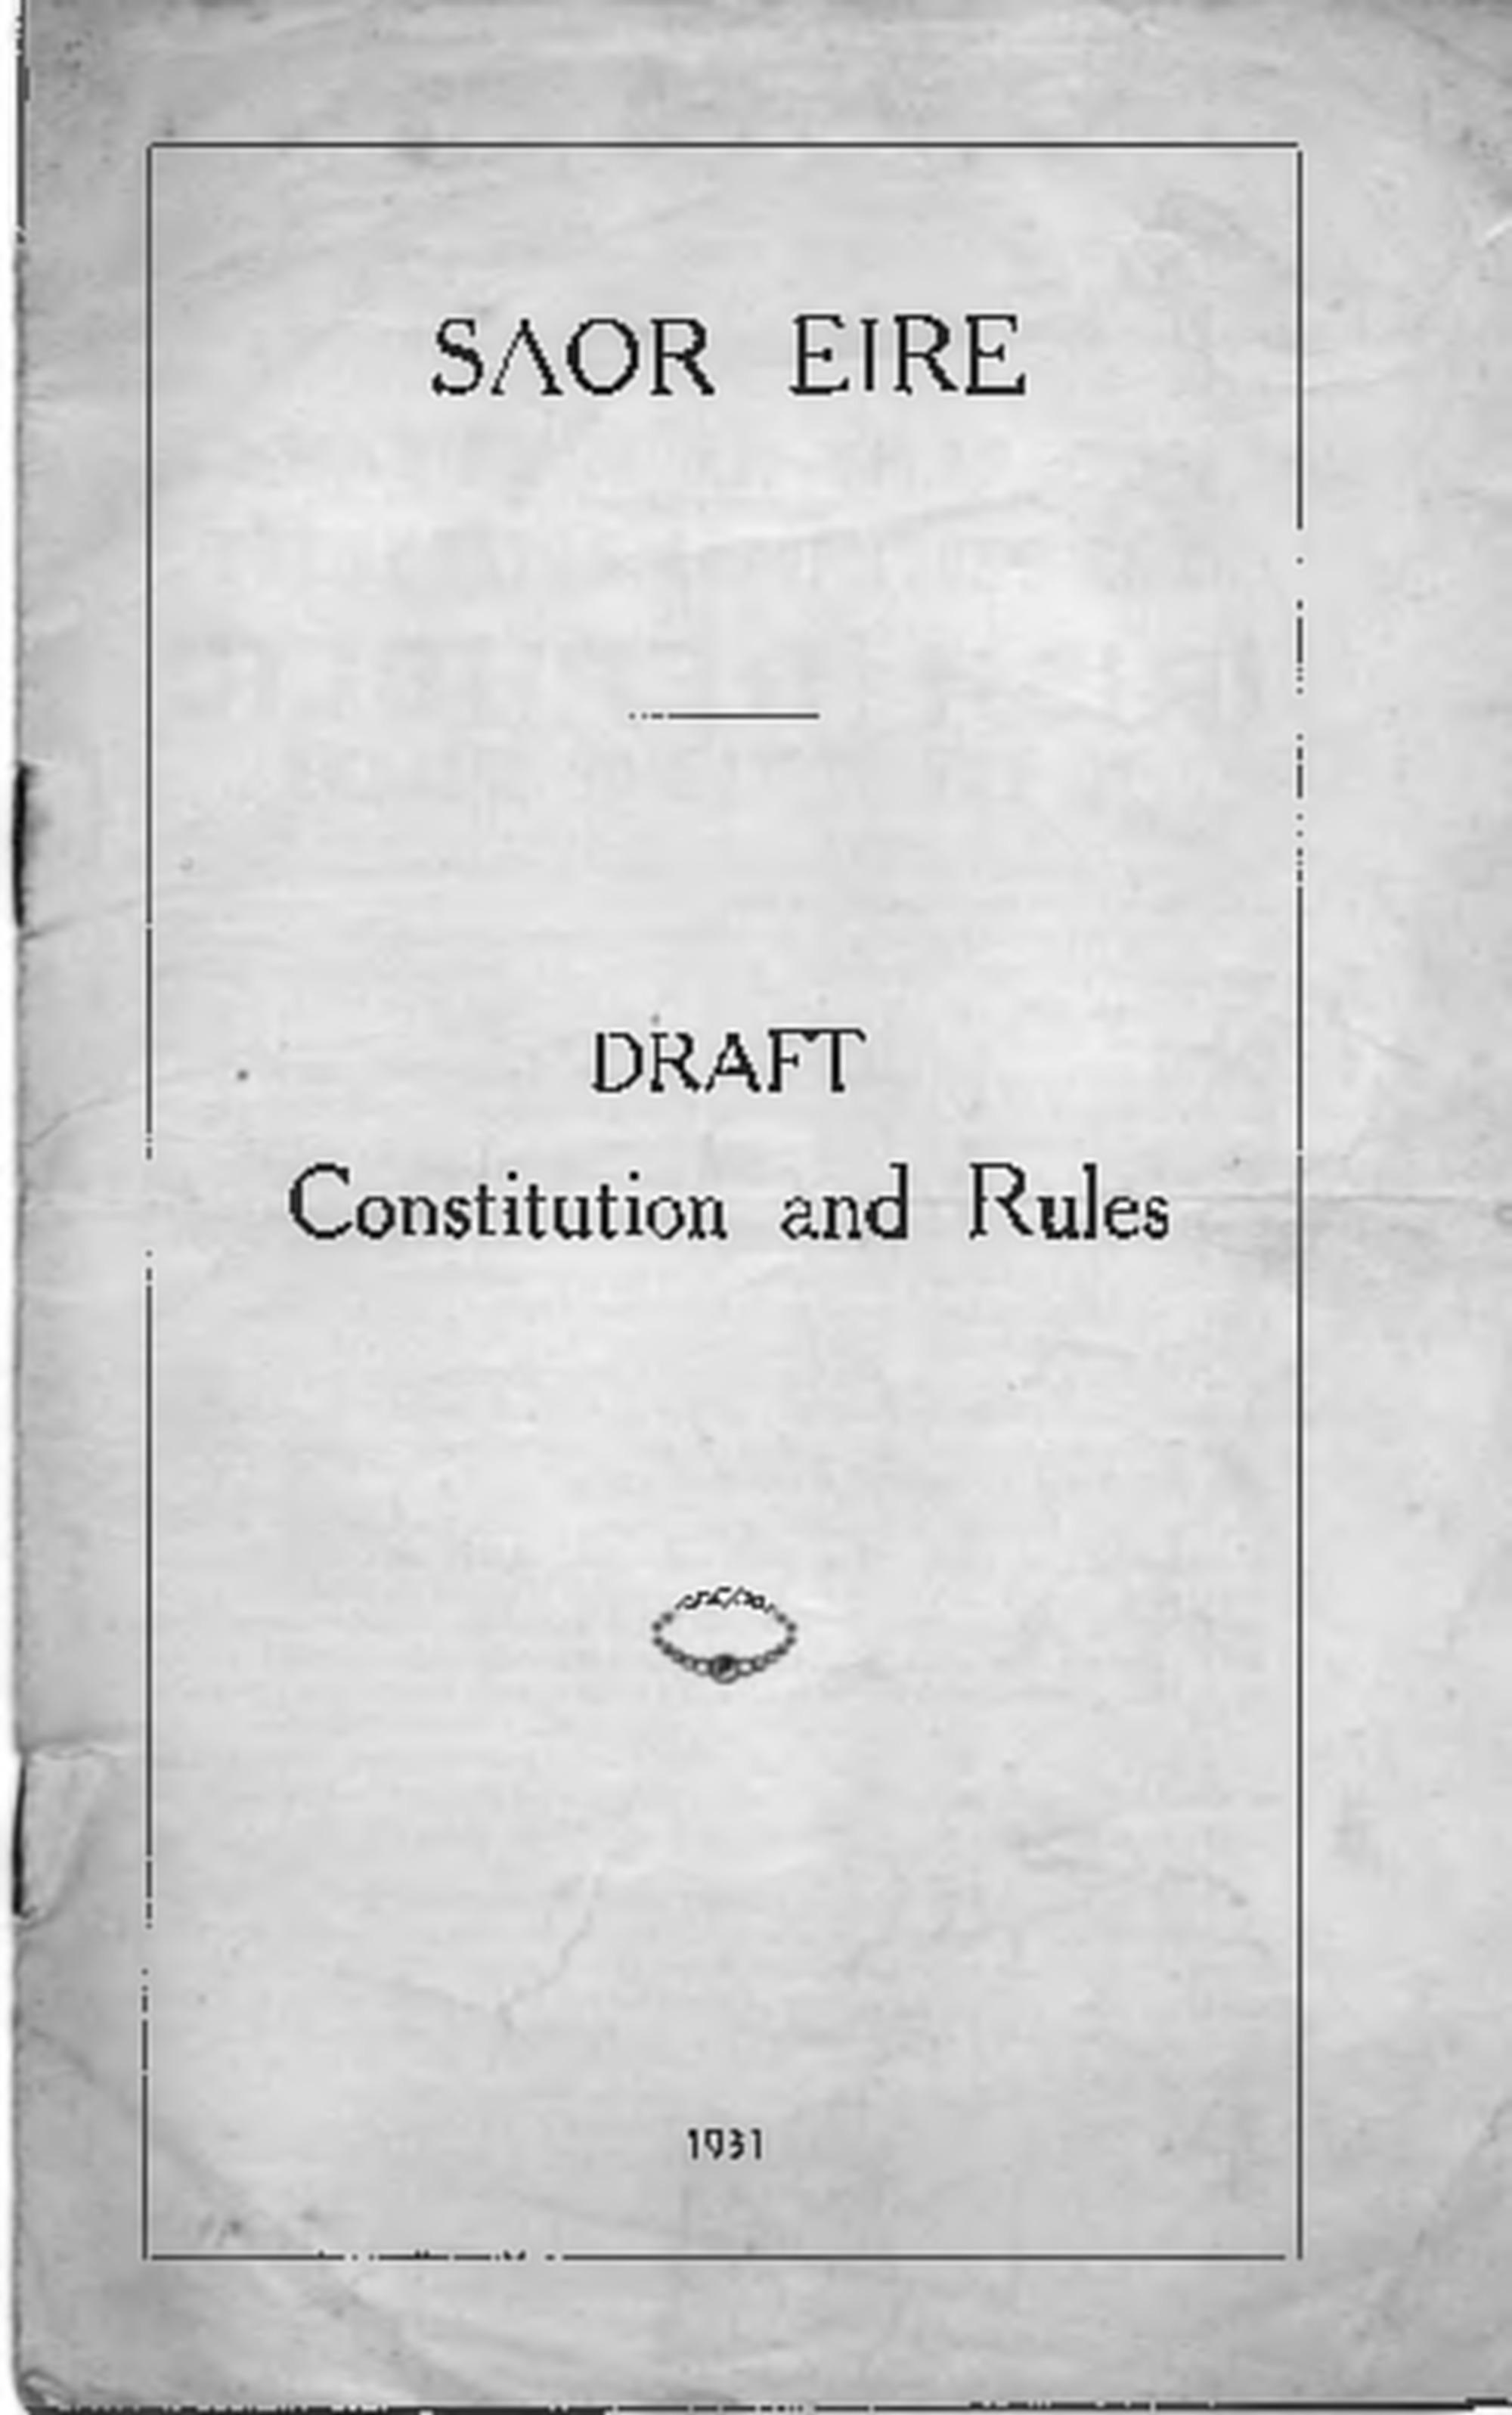 
Scanned black and white front cover page reading: Saor Éire – Draft Constitution and Rules, 1931